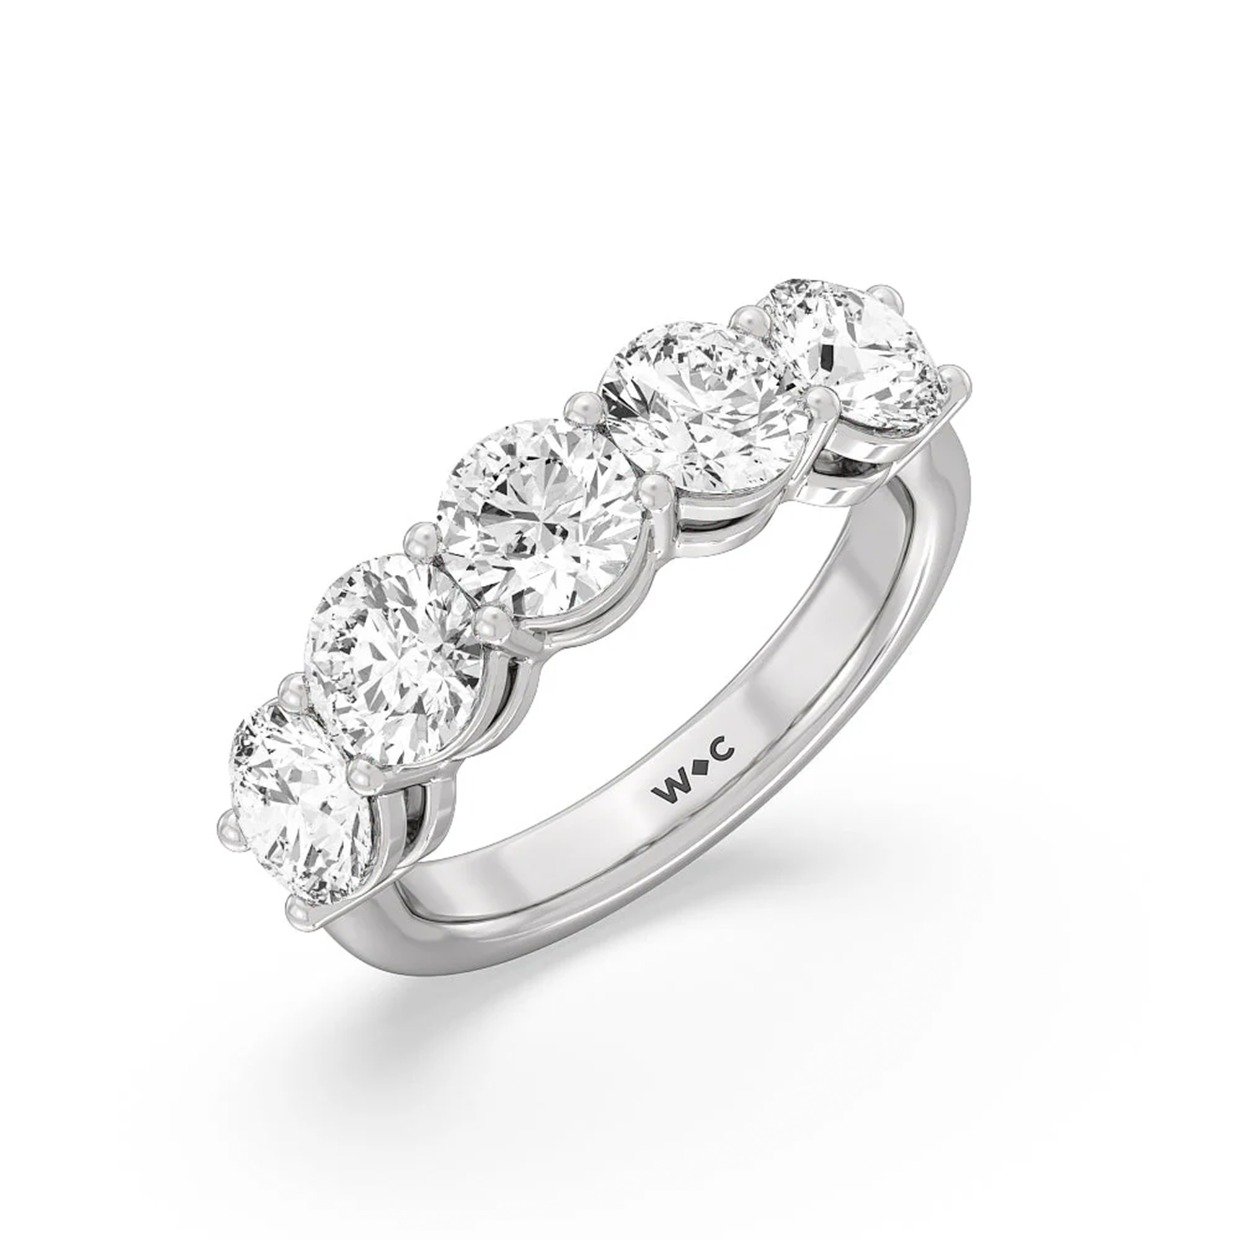 5 stone diamond anniversary ring by With Clarity